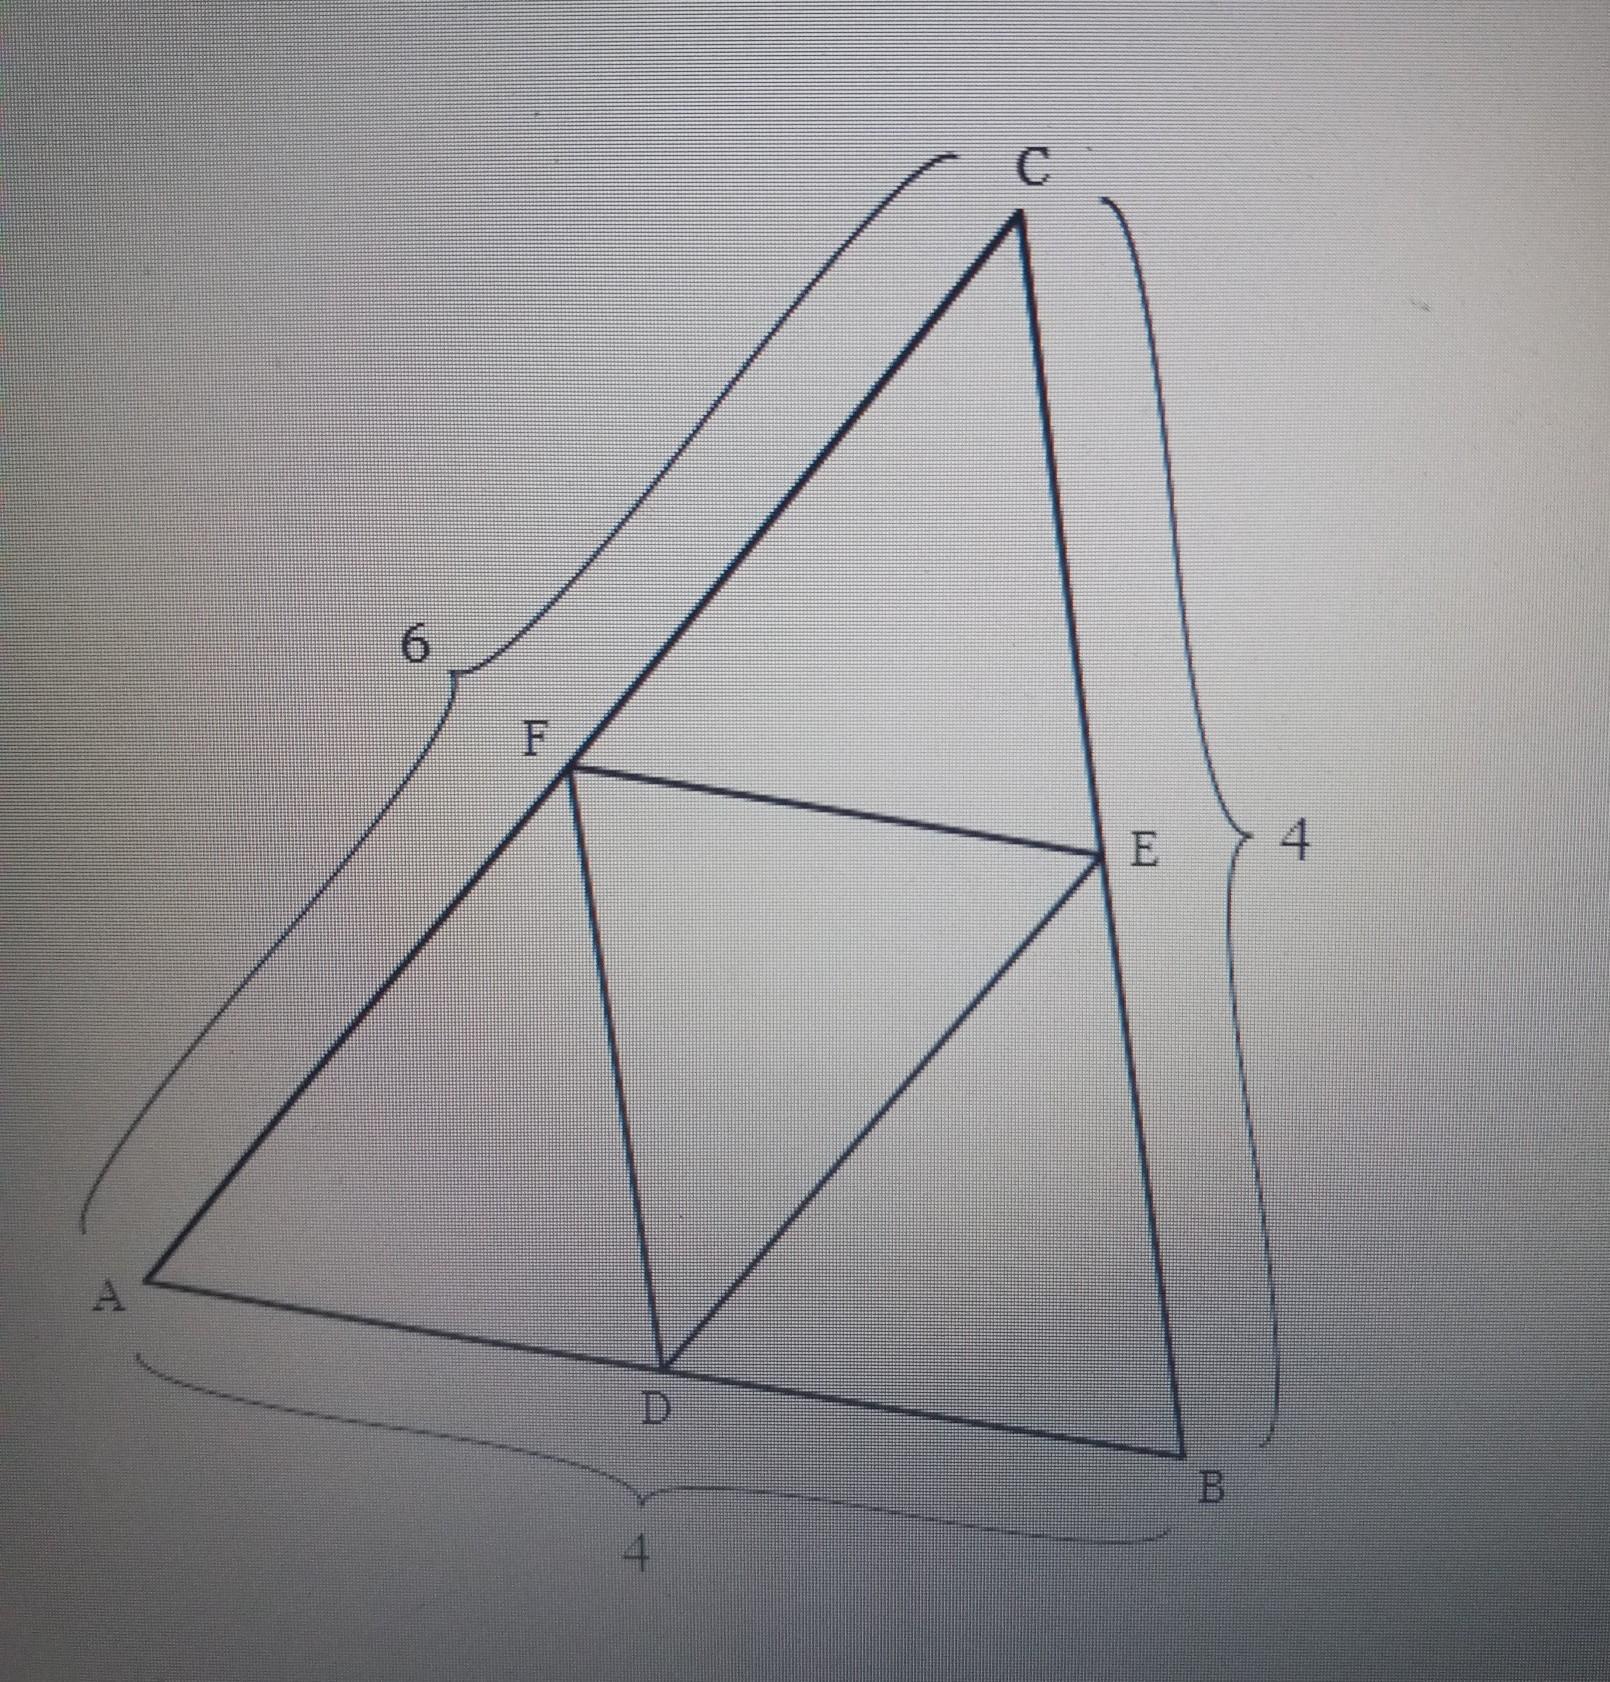 Triangle DEF Is Formed By Connecting The Midpoints Of The Side Of Triangle ABC. The Lengths Of The Sides